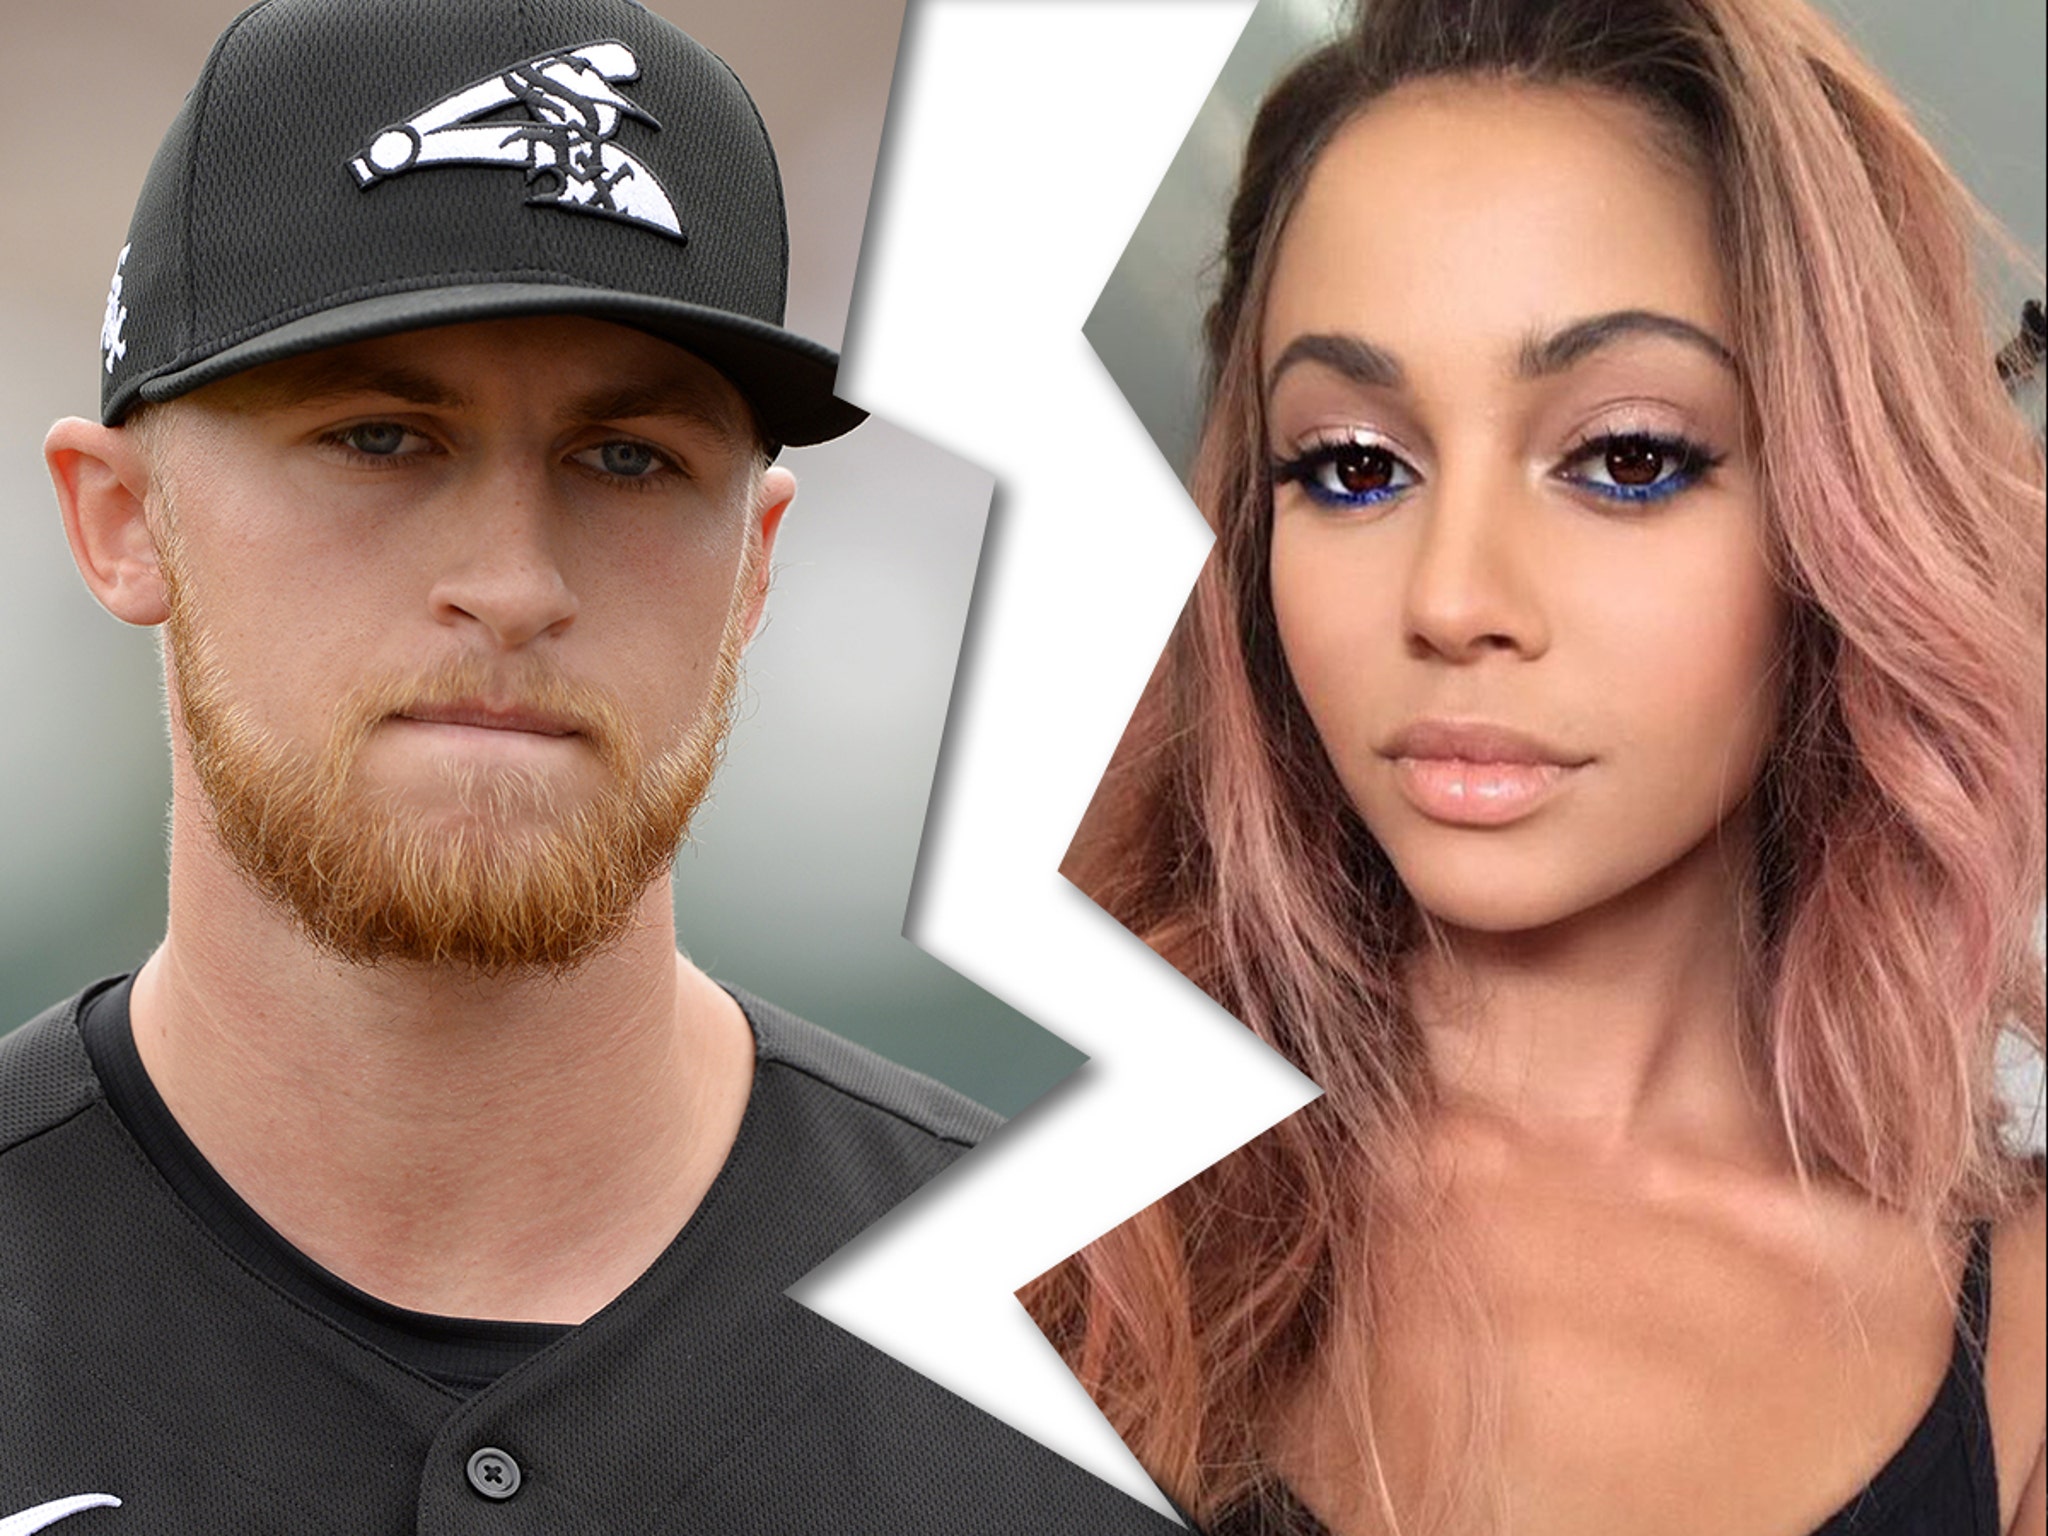 Vanessa Morgan Is Pregnant, Expecting 1st Child With Michael Kopech